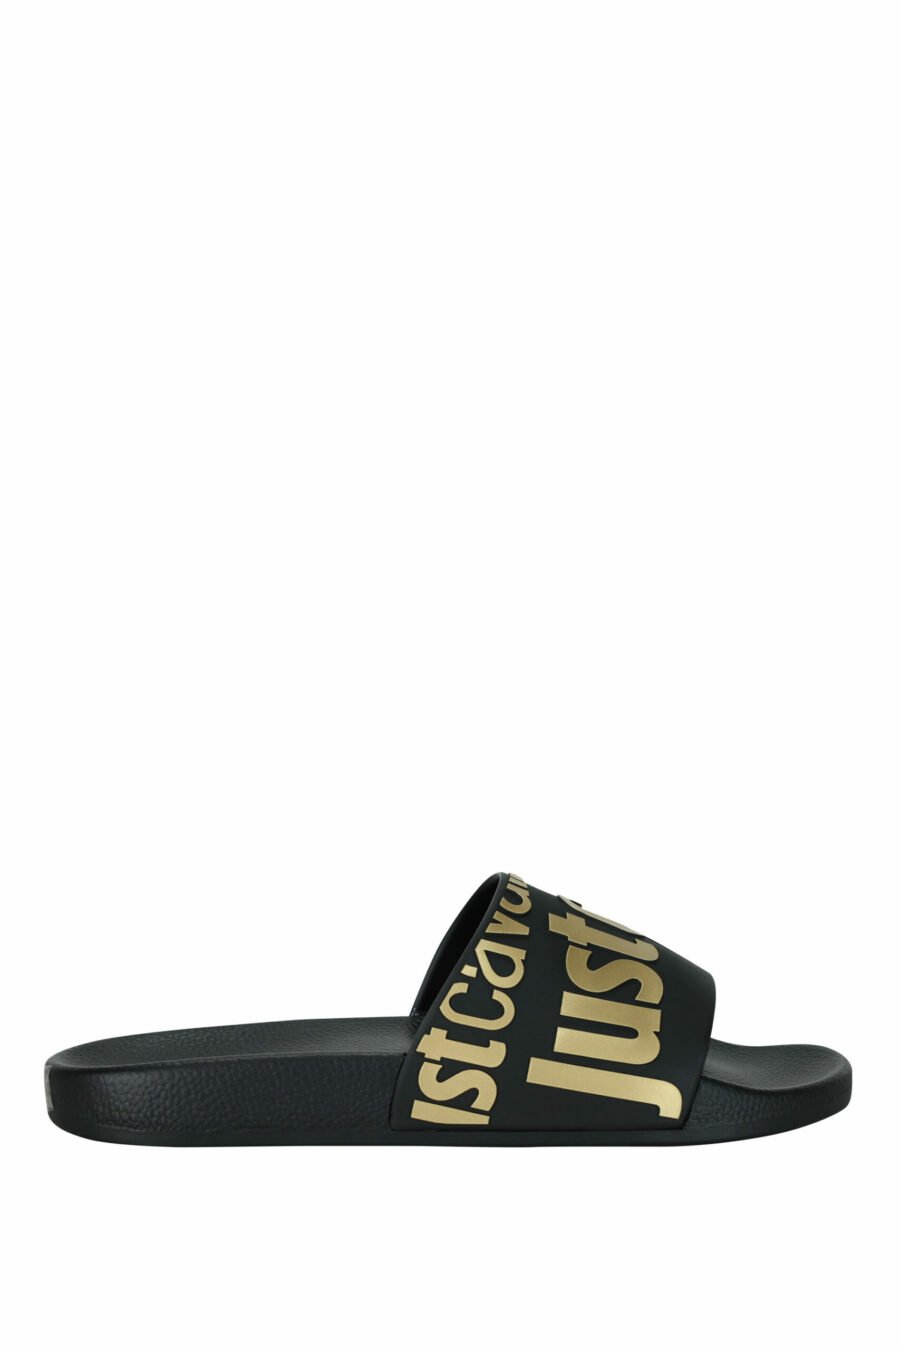 Black flip flops with gold "all over logo just cavalli" maxilogo - 8052672697158 scaled